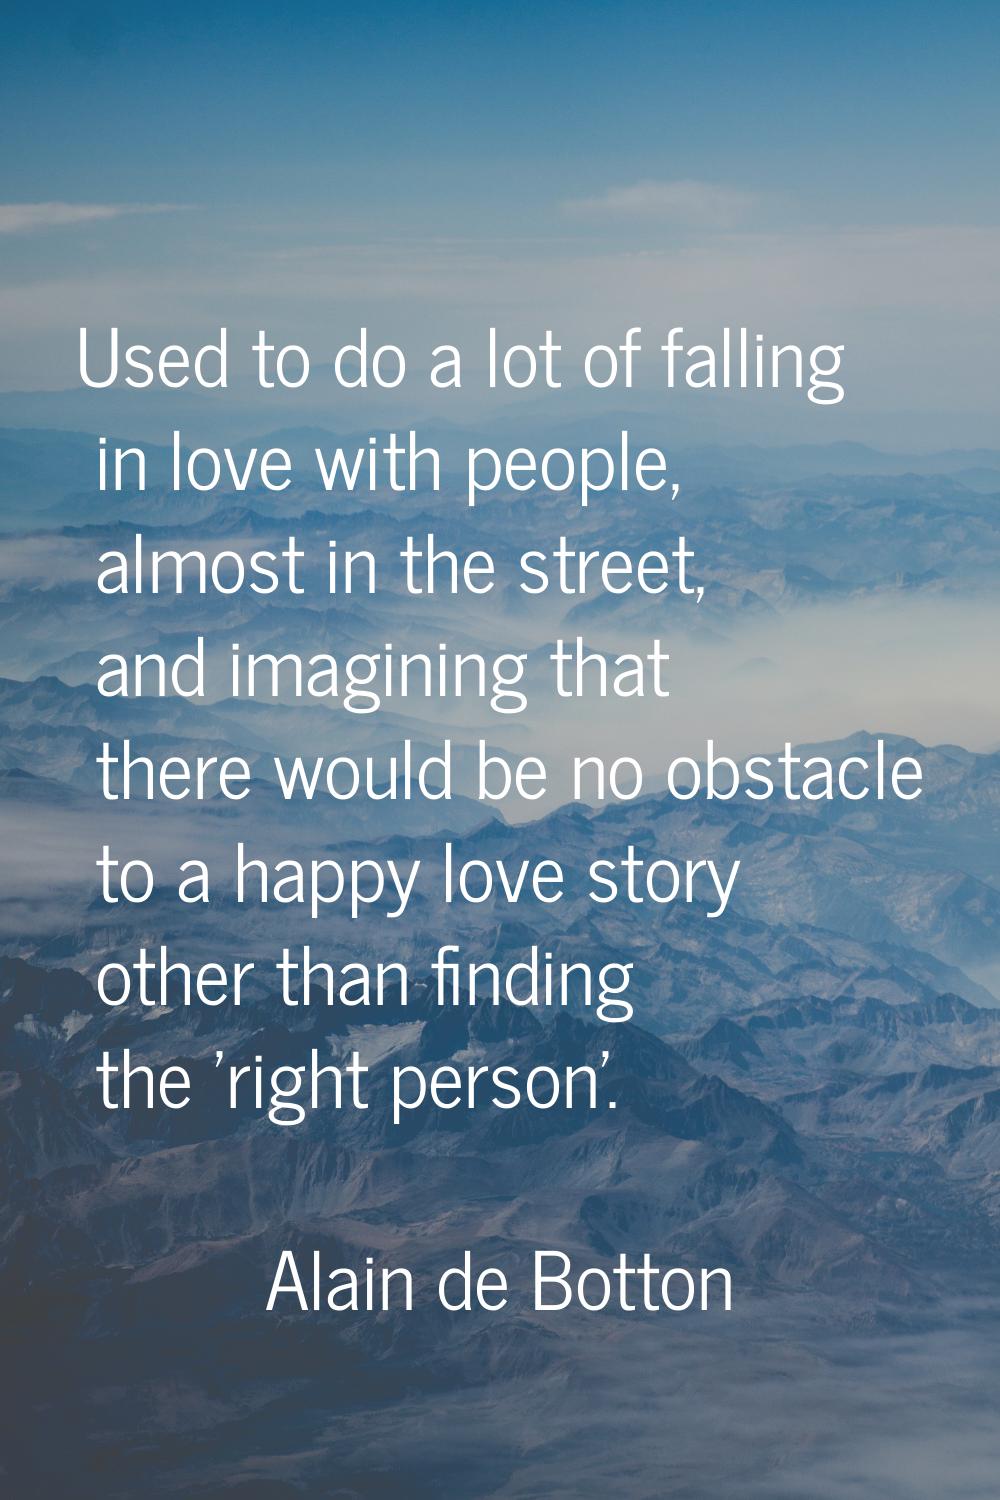 Used to do a lot of falling in love with people, almost in the street, and imagining that there wou